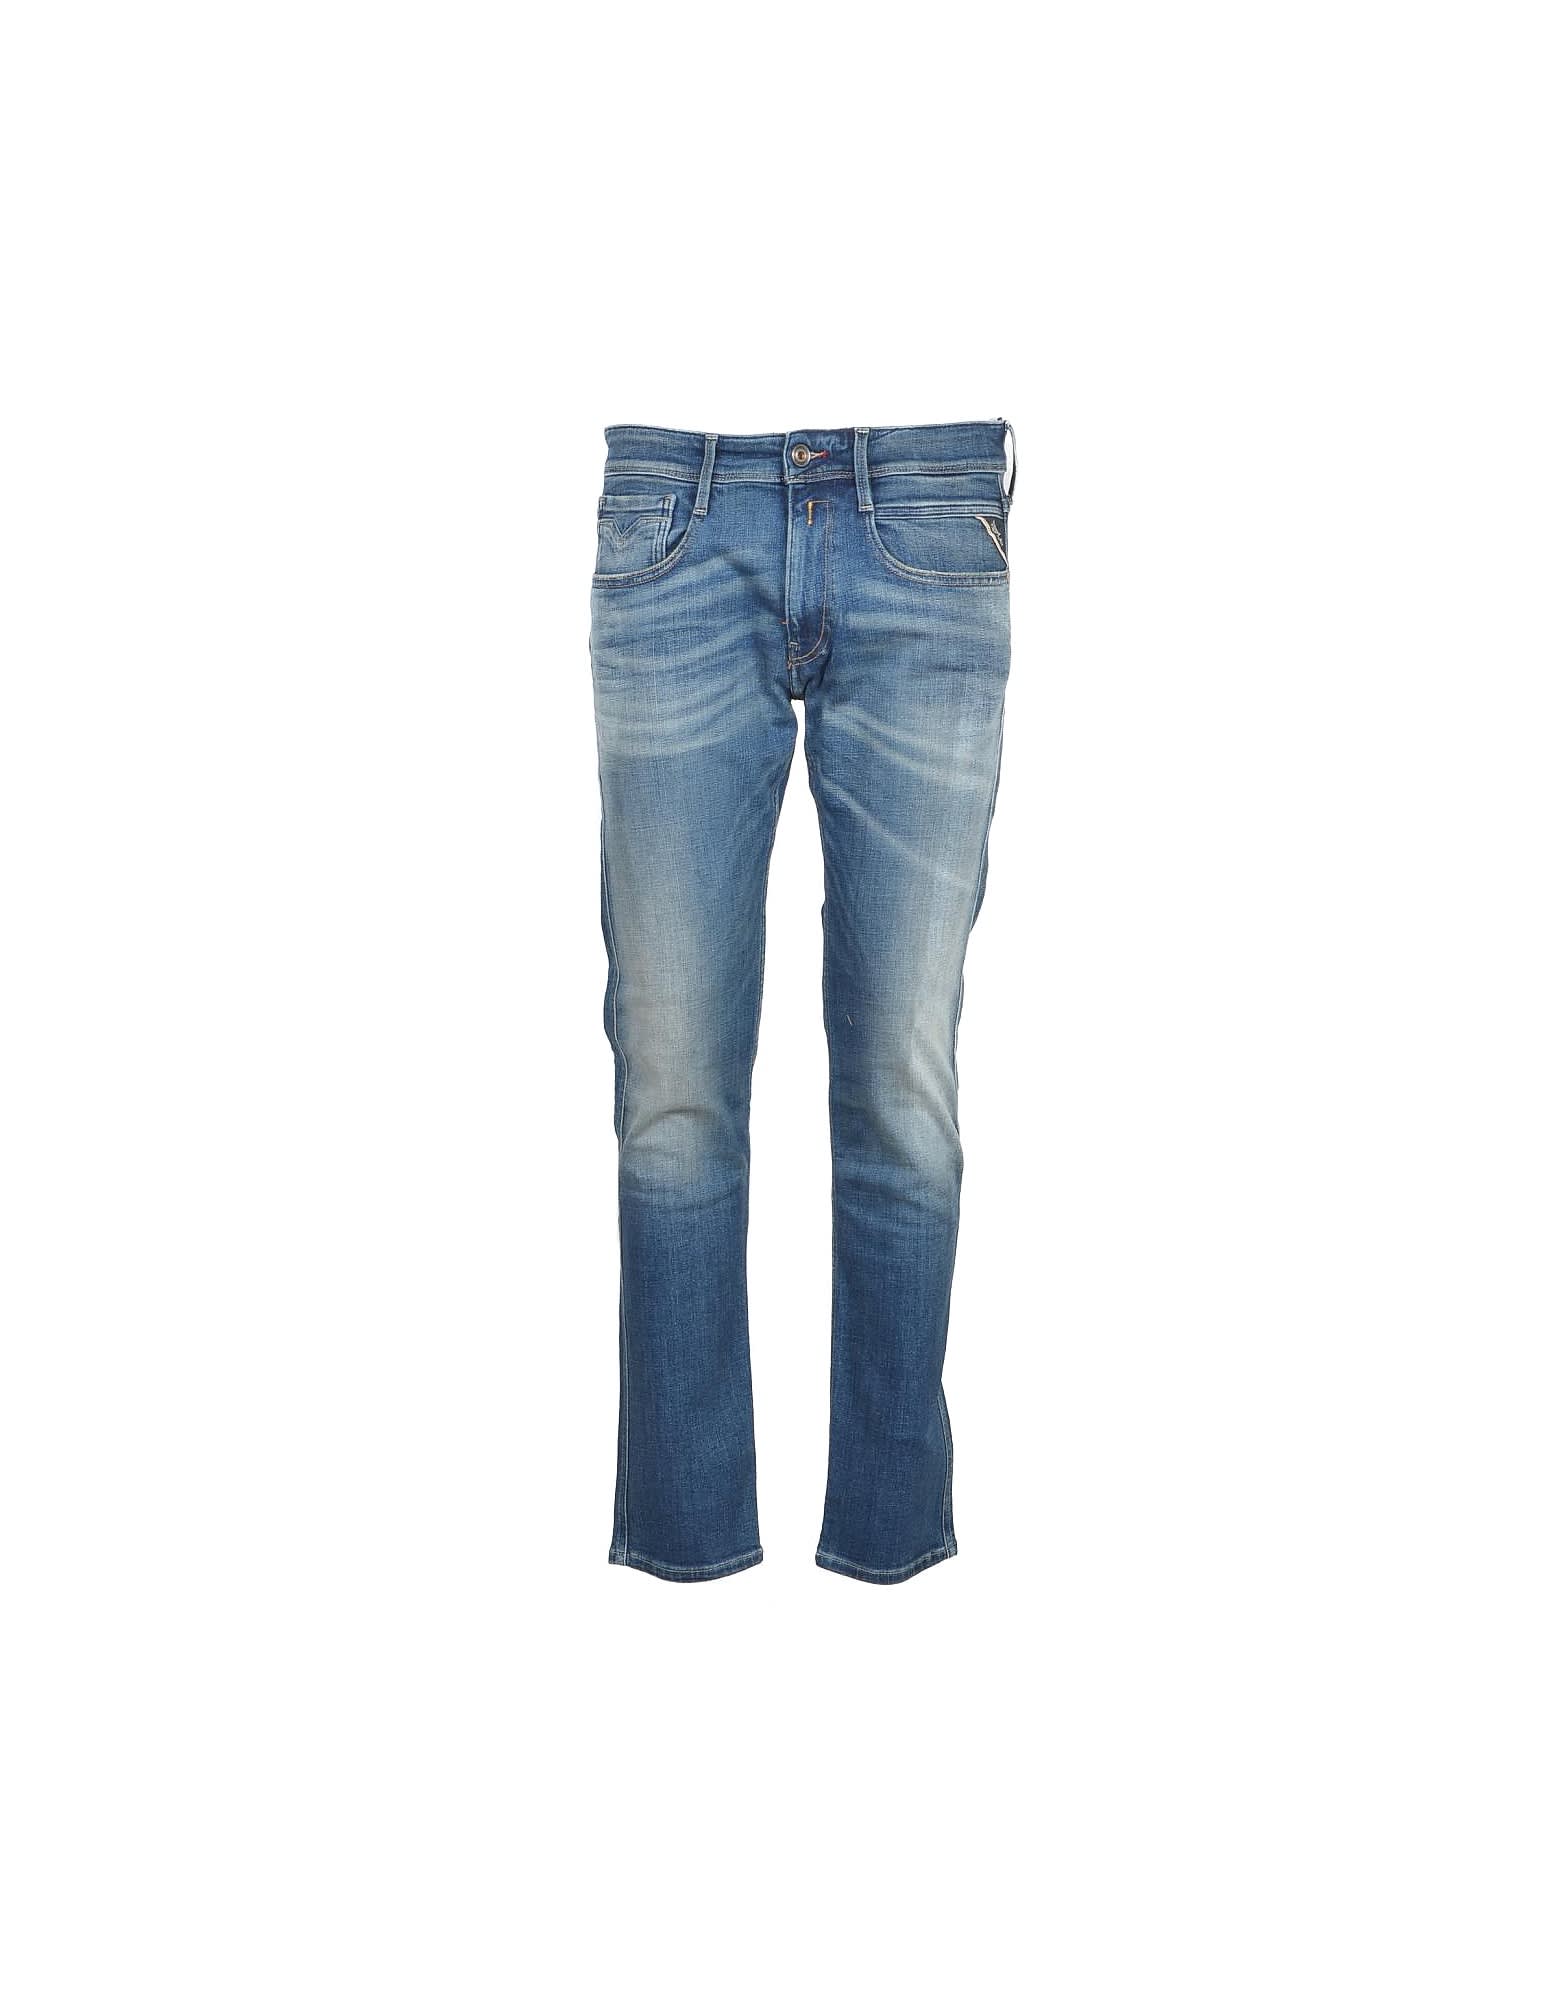 Replay Mens Blue Jeans